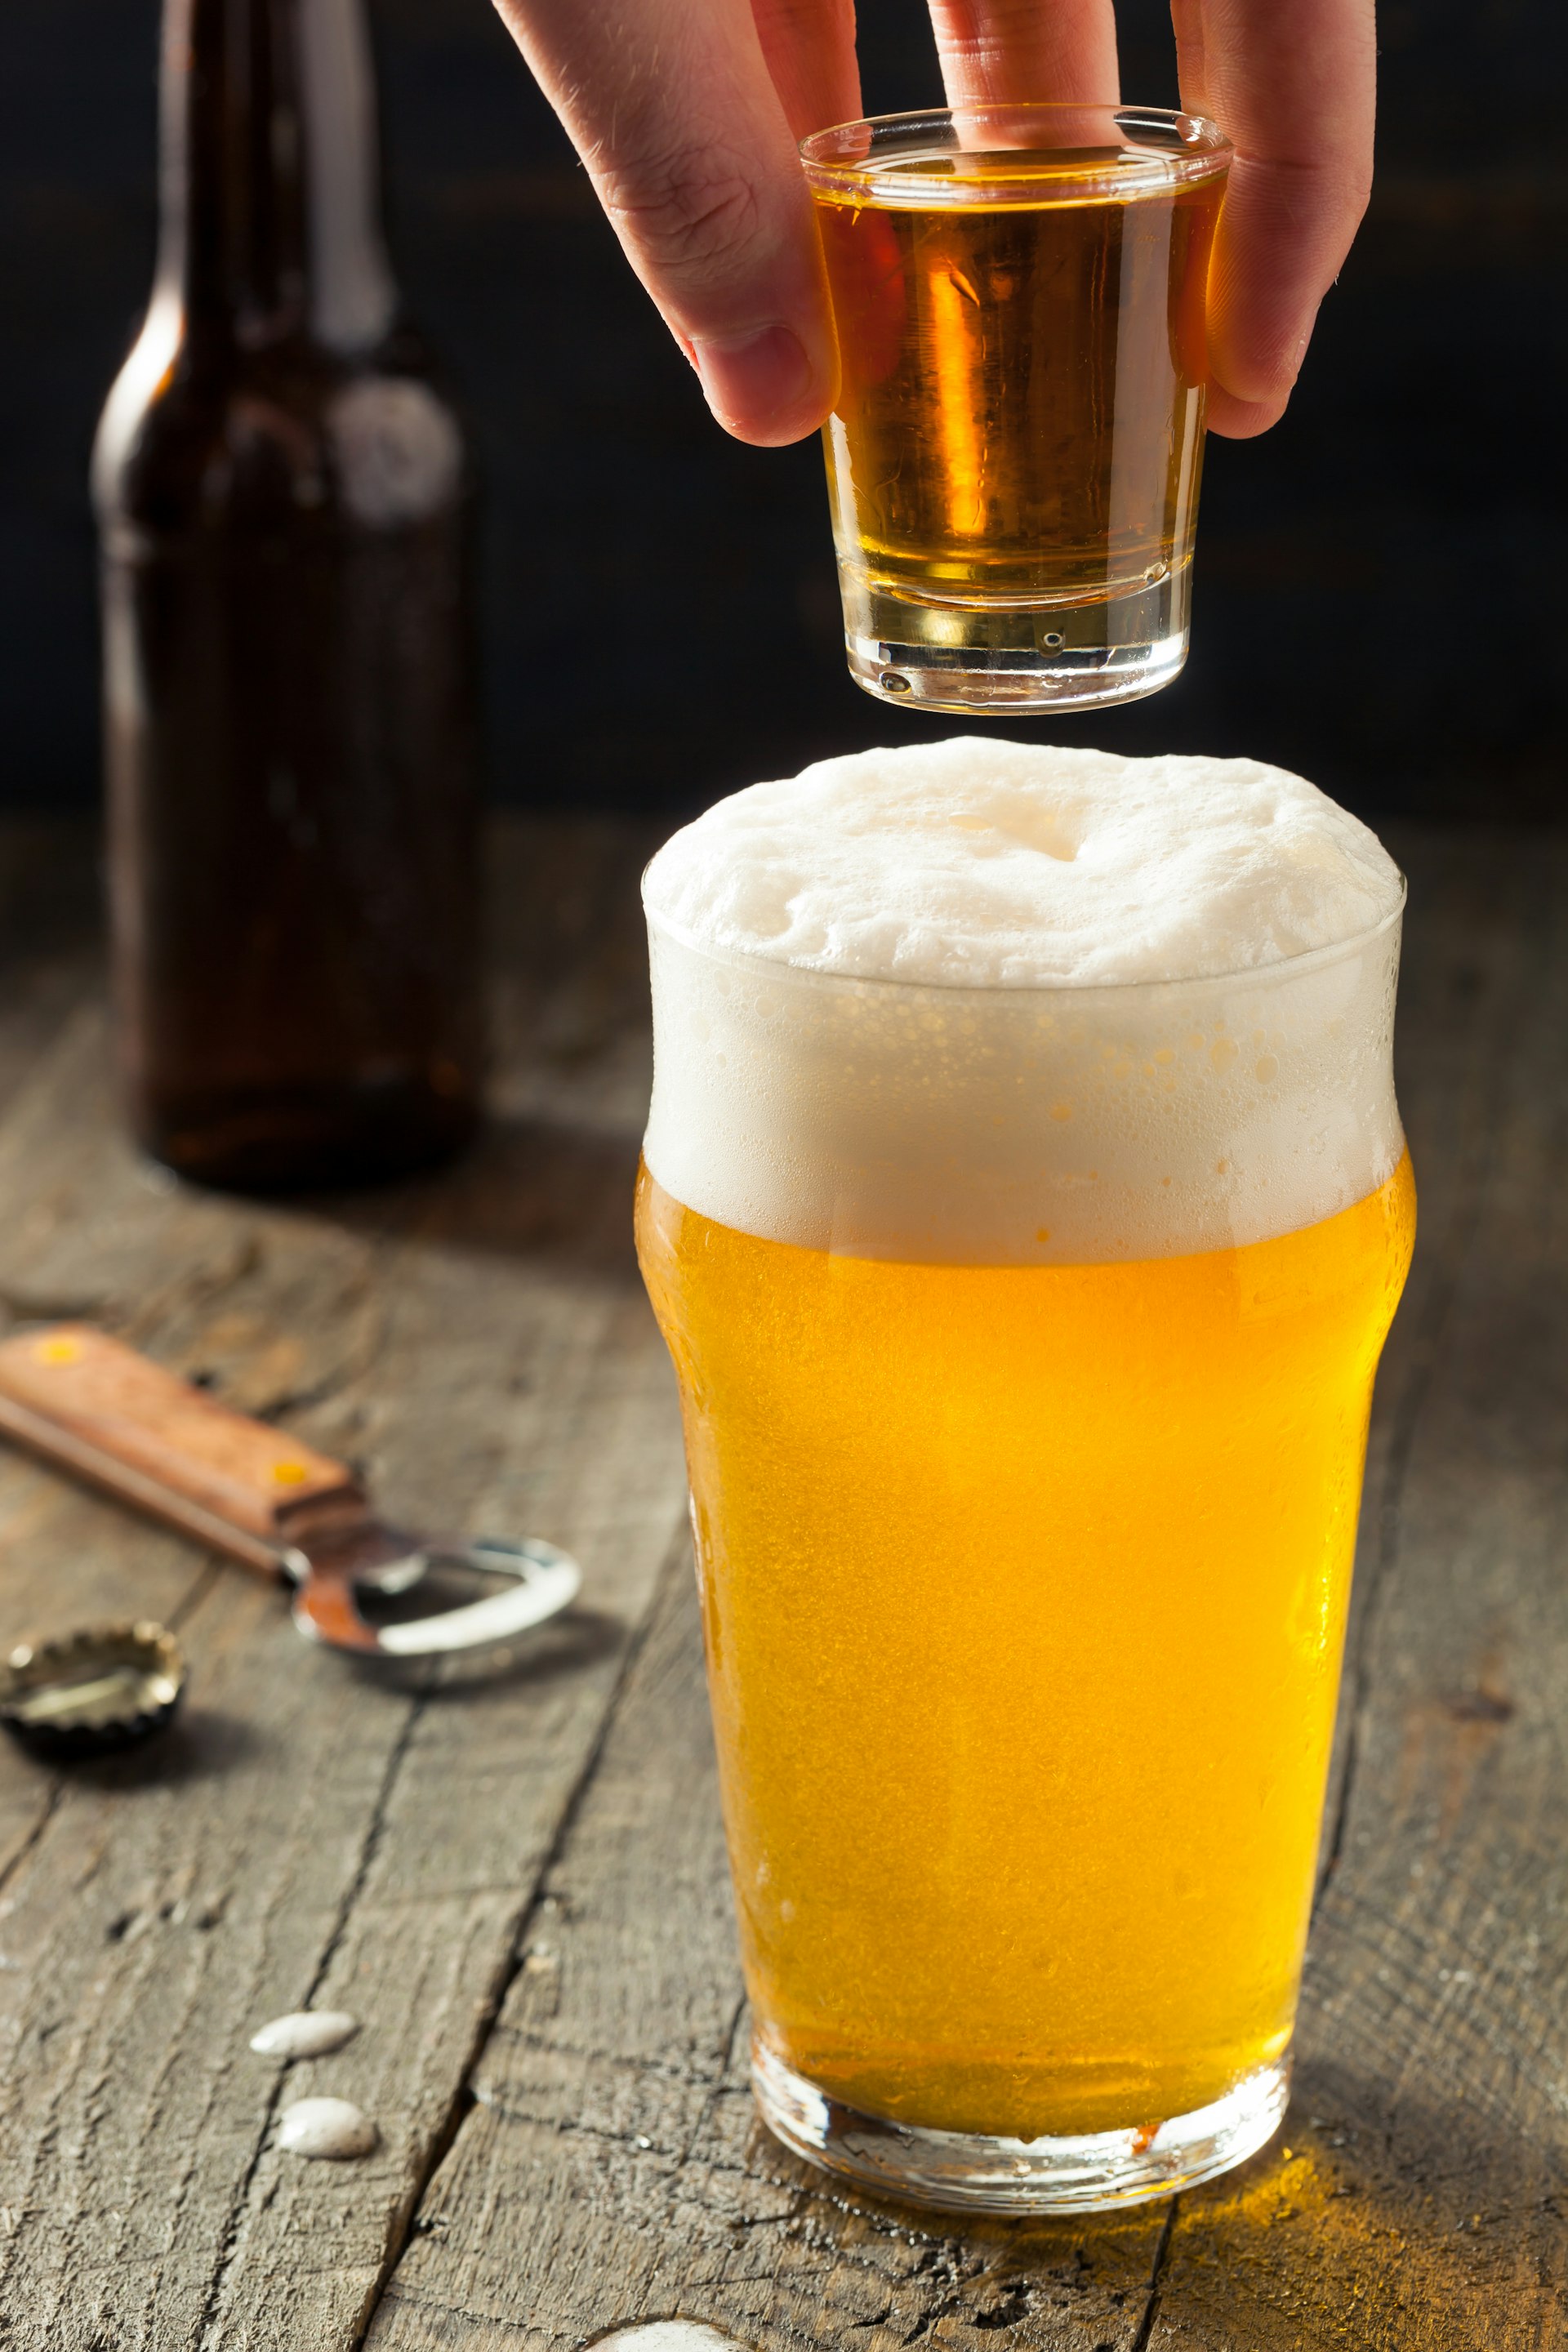 A person drops a shot of whiskey into a tall glass of beer